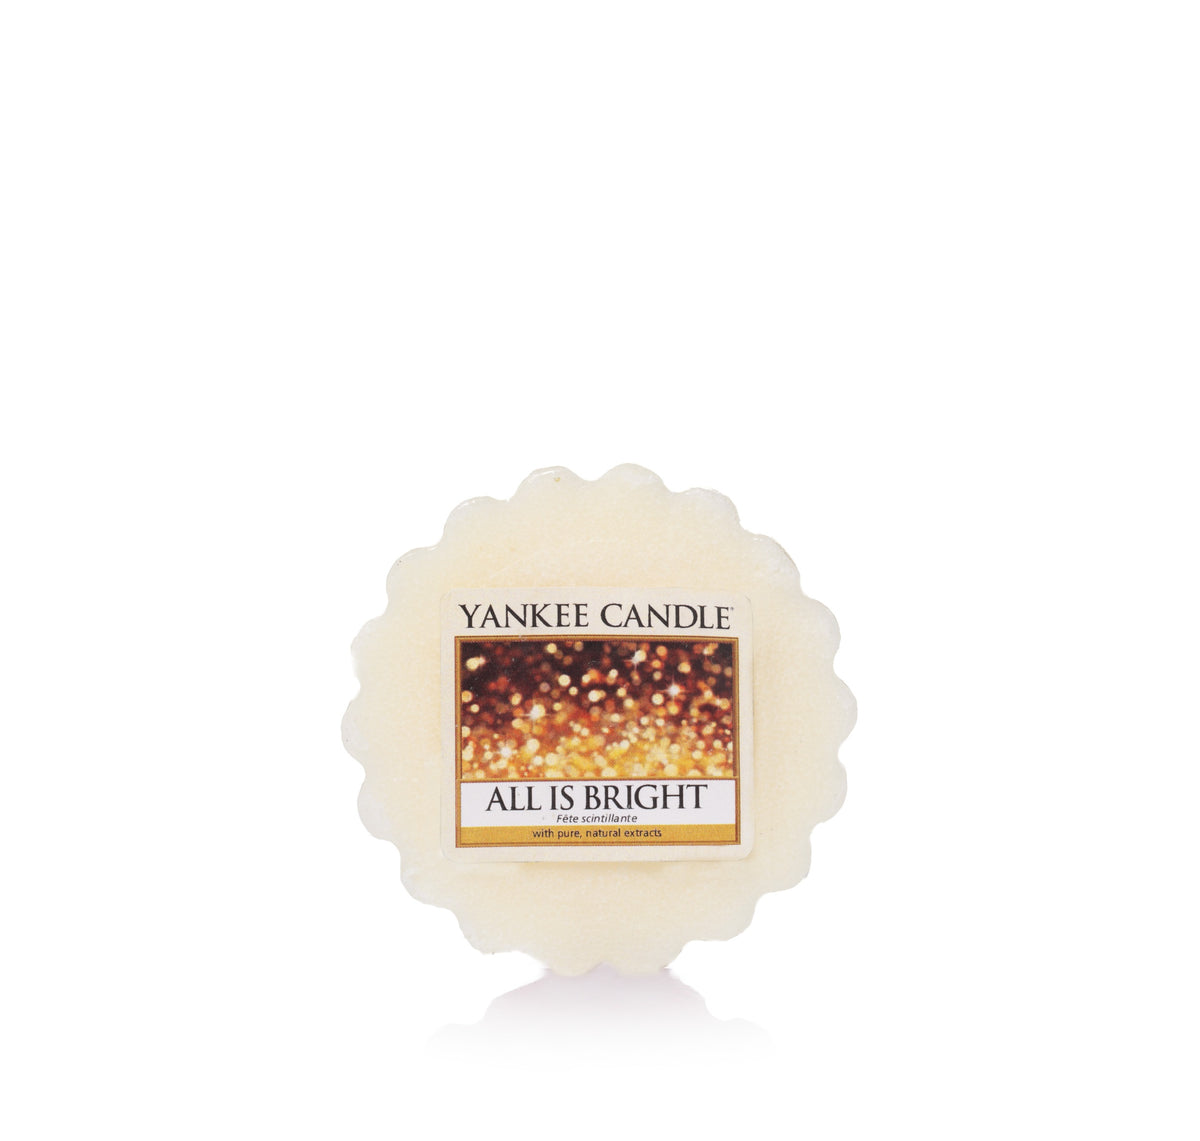 ALL IS BRIGHT -Yankee Candle- Tart Yankee Candle